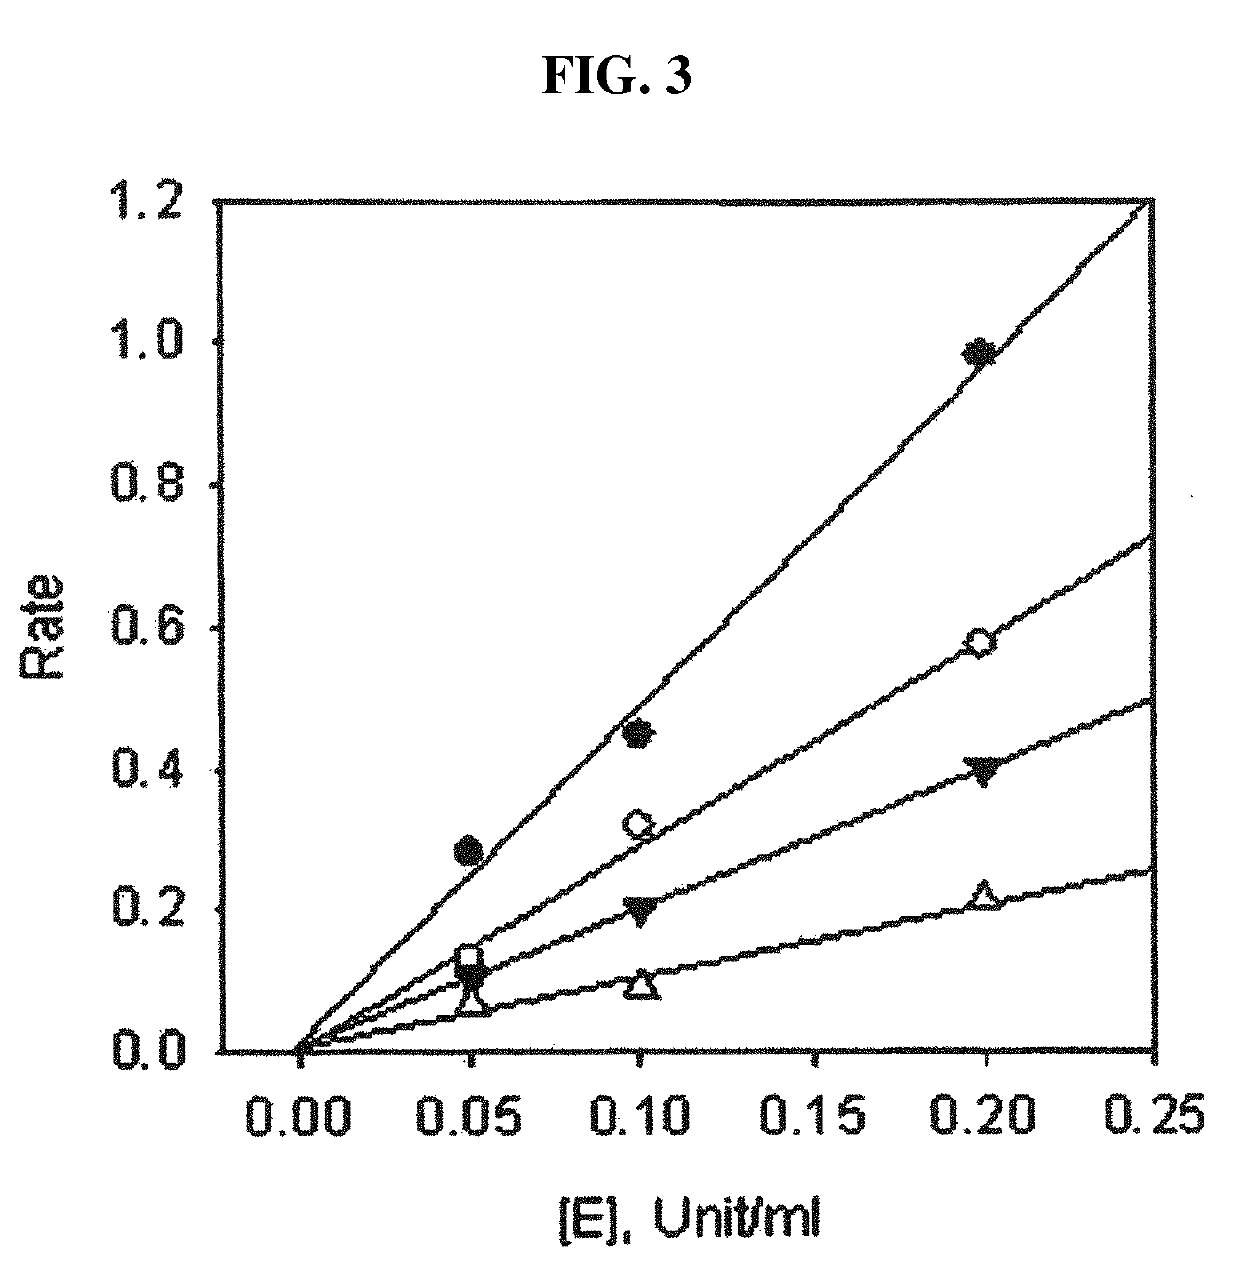 Composition for suppressing neuraminidase activity comprising geranylated flavonoid derived from <i>Paulownia tomentosa </i>as active ingredient